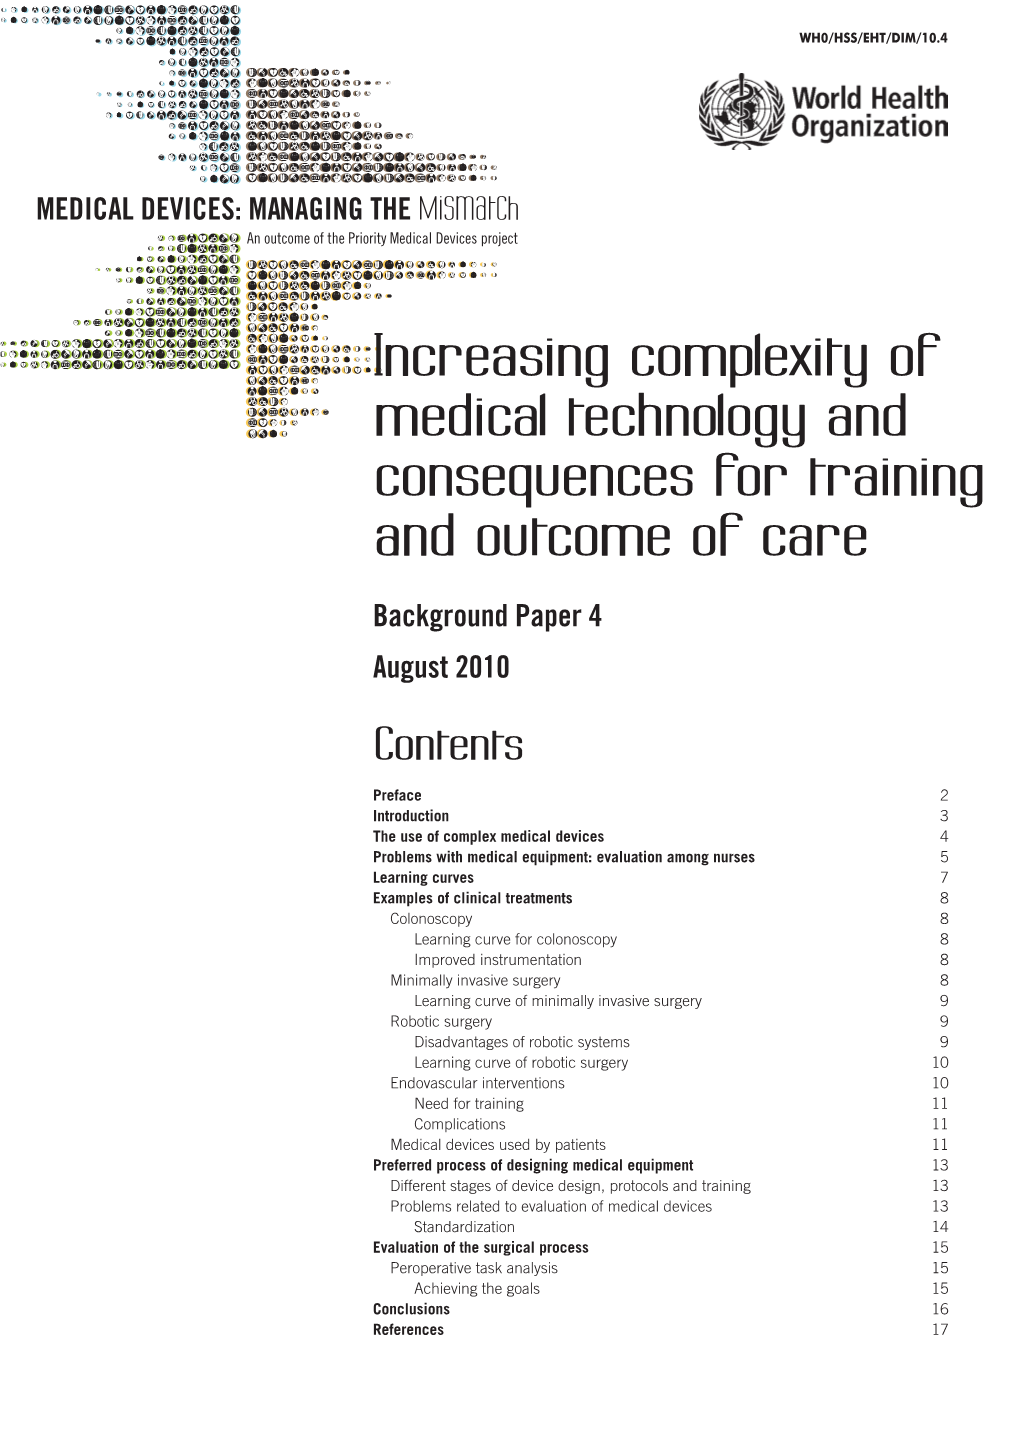 Increasing Complexity of Medical Technology and Consequences for Training and Outcome of Care